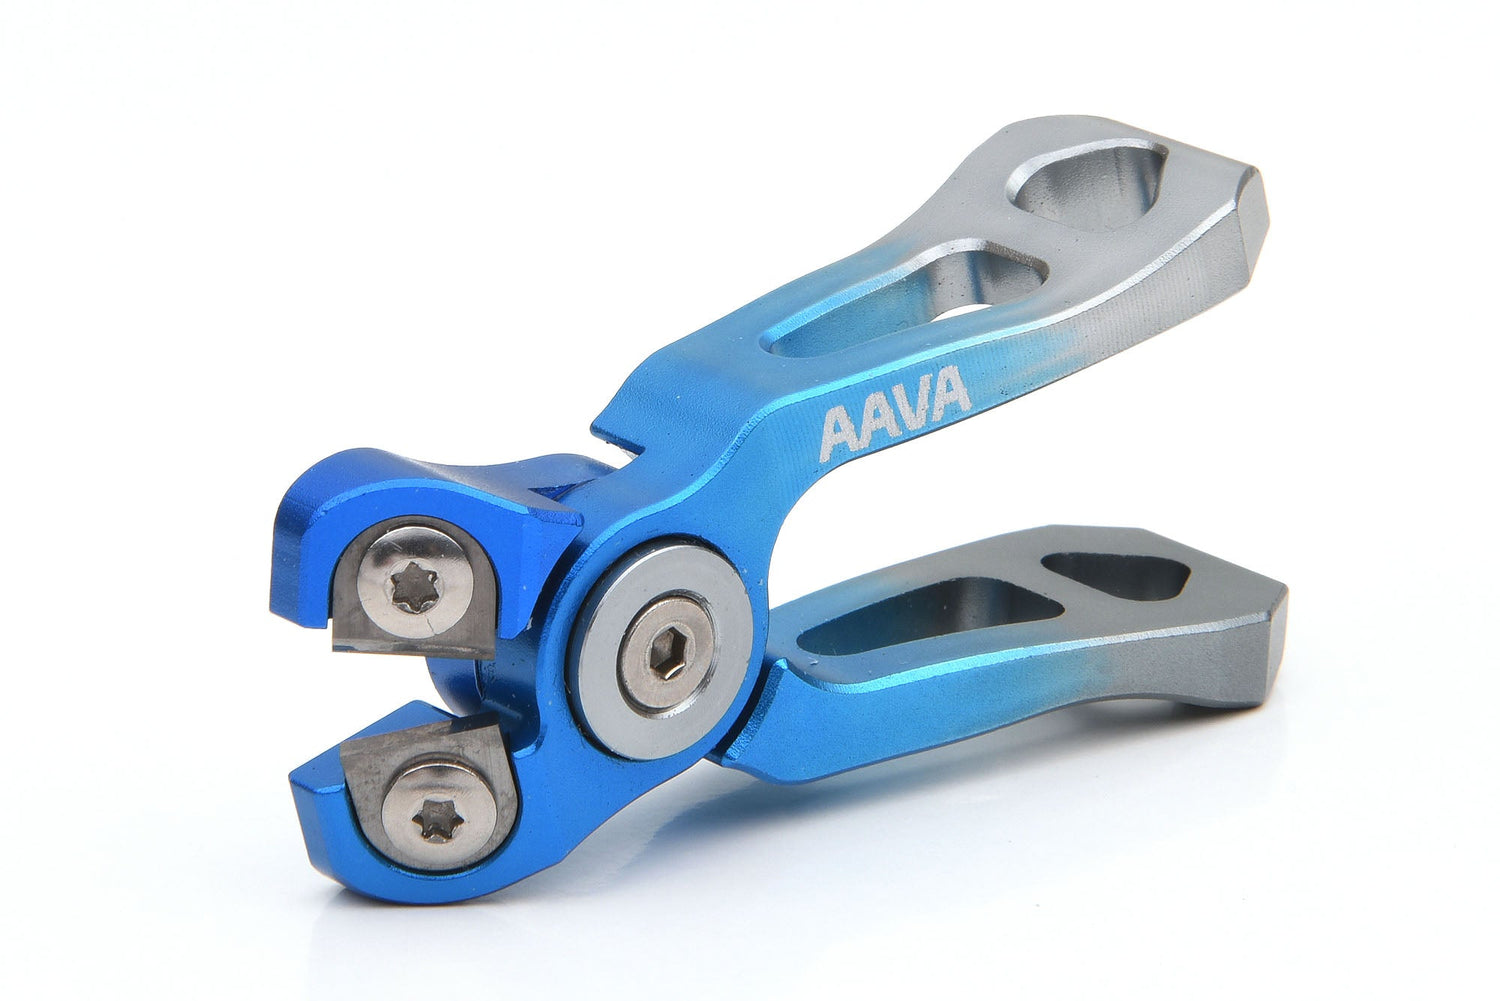 Aava Nippers